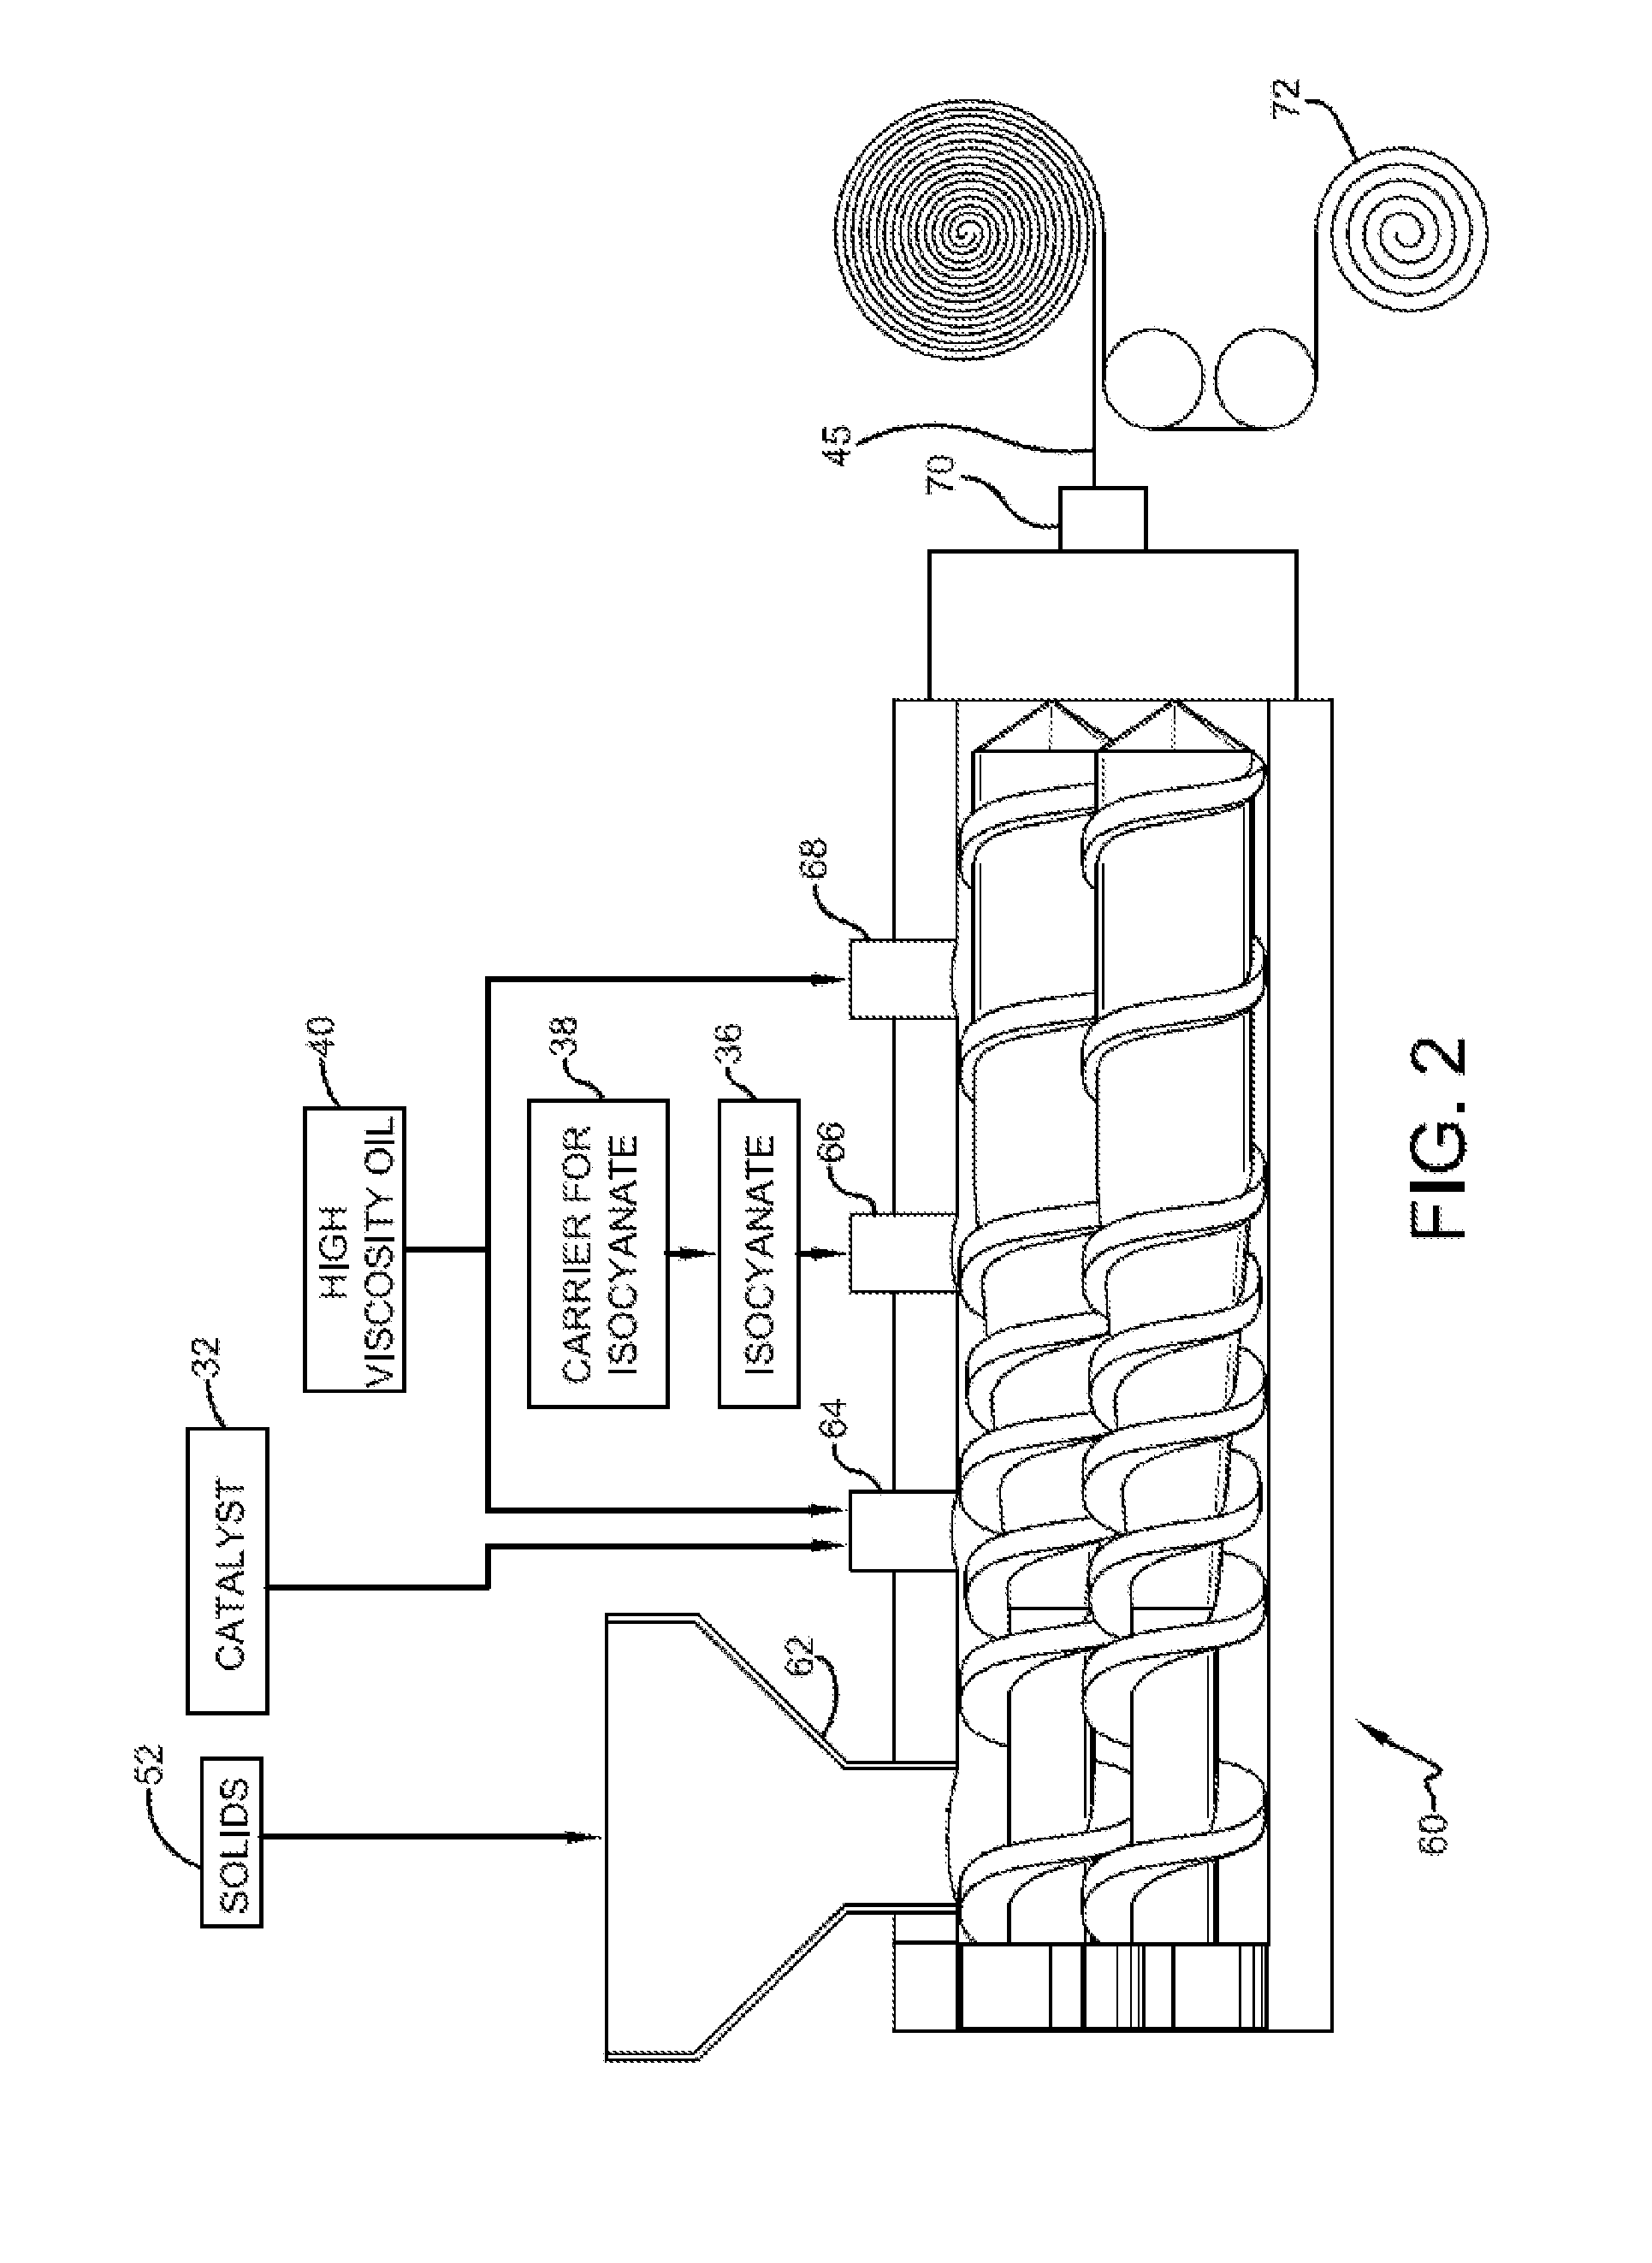 Extrudable pressure sensitive non-black adhesive compositions and methods for preparing the same